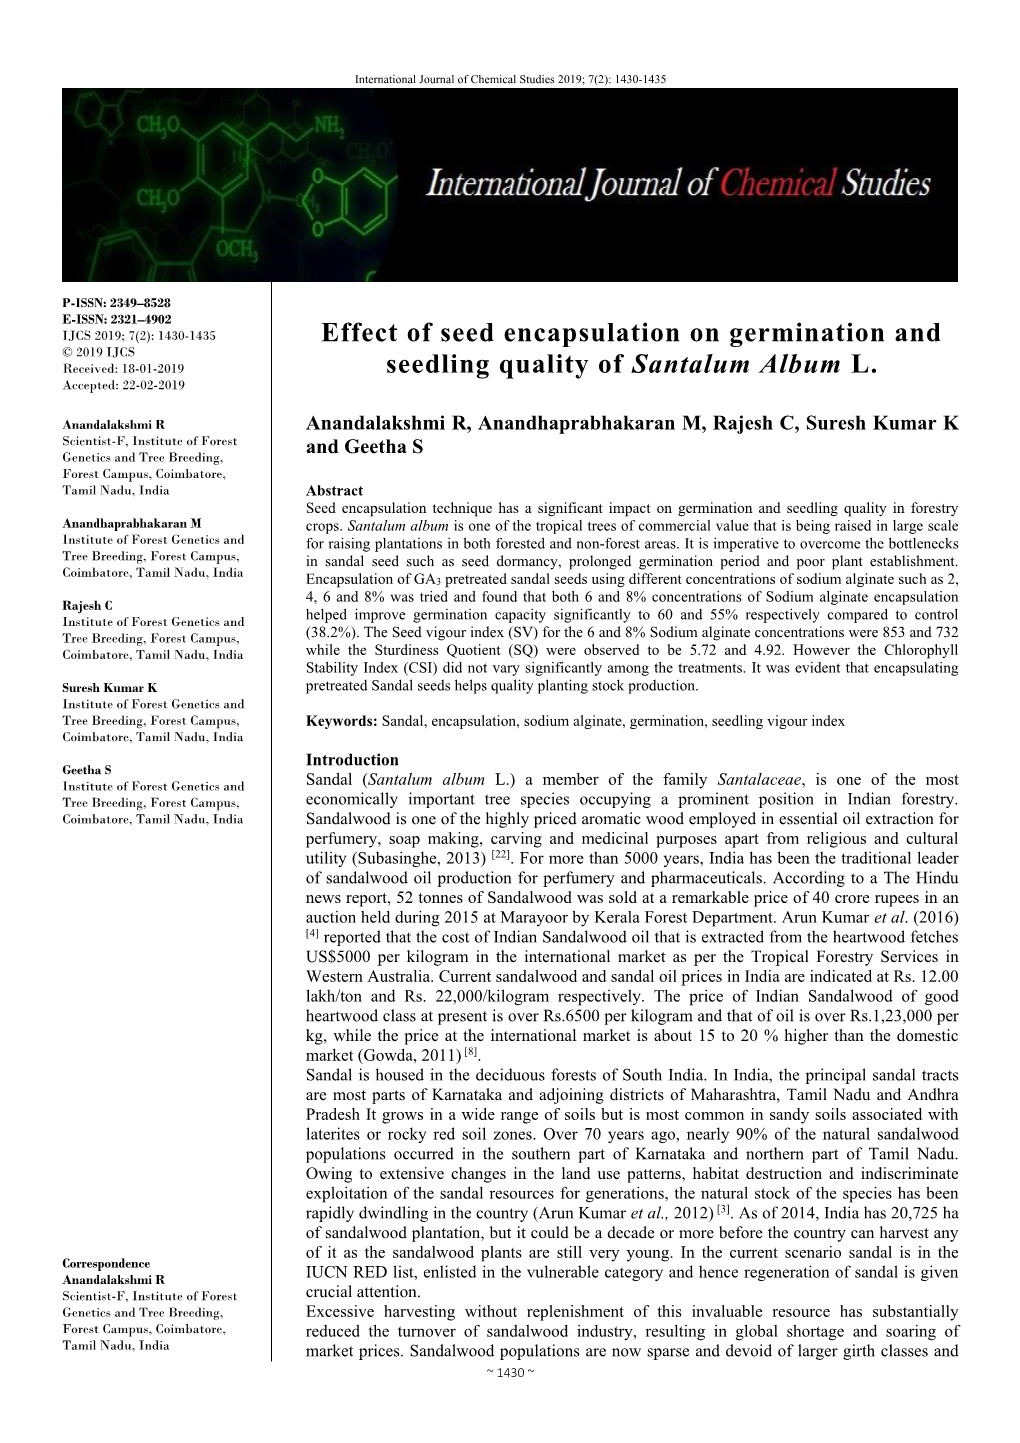 Effect of Seed Encapsulation on Germination and Seedling Quality of Santalum Album L